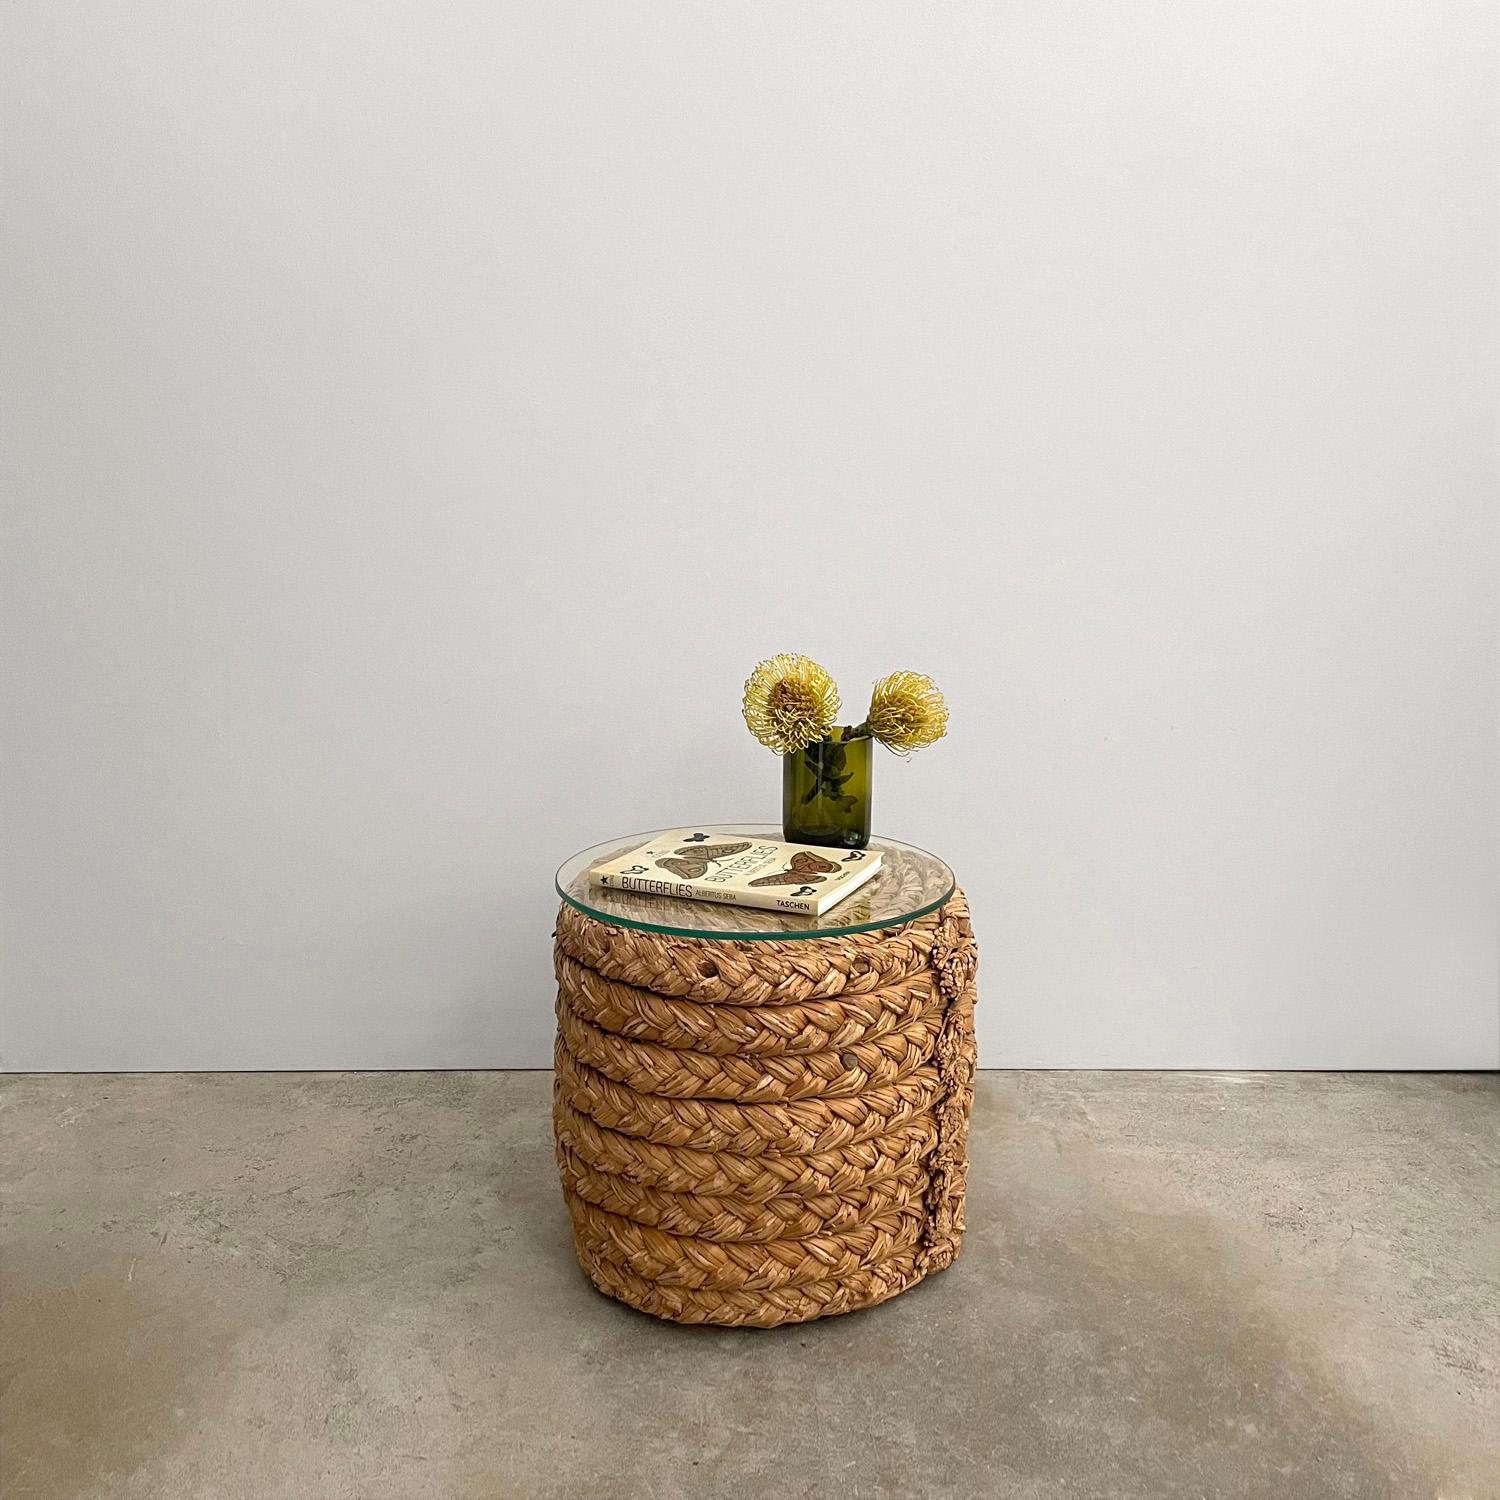 Adrien Audoux & Frida Minet rope side table
France, circa 1950s
Braided seagrass is carefully coiled around a heavyweight base
Secured with aged wooden pegs and finished with metal banding on the ends
Patina from age and use
We have made a new glass